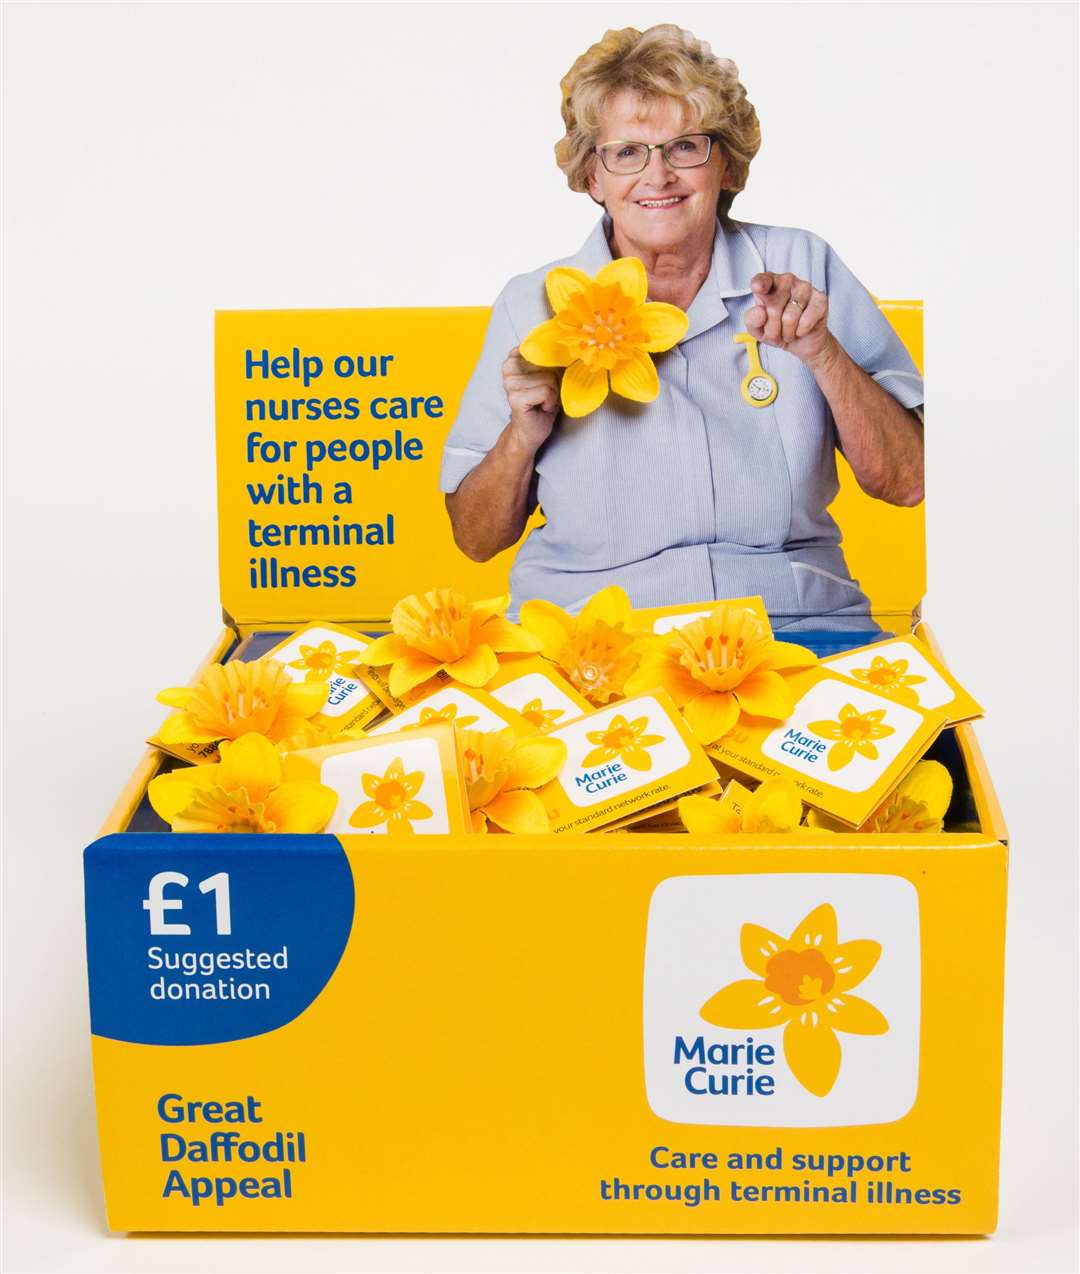 All donations from the Great Daffodil Appeal will ensure that Marie Curie nurses, doctors and hospice staff can continue working on the front line.